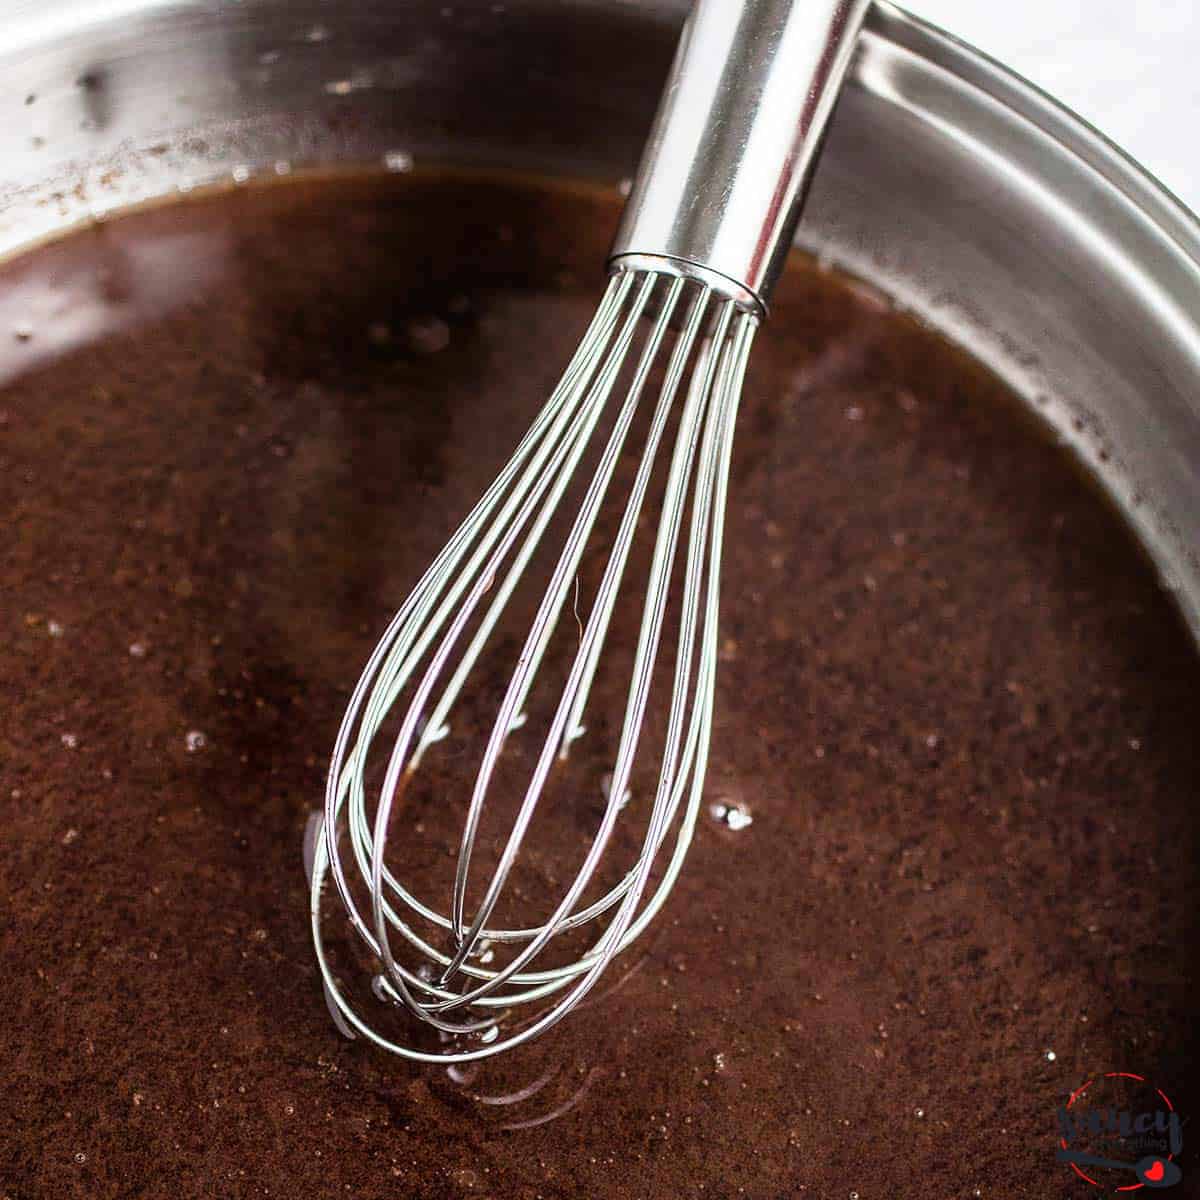 Complete au jus in pan with whisk close up